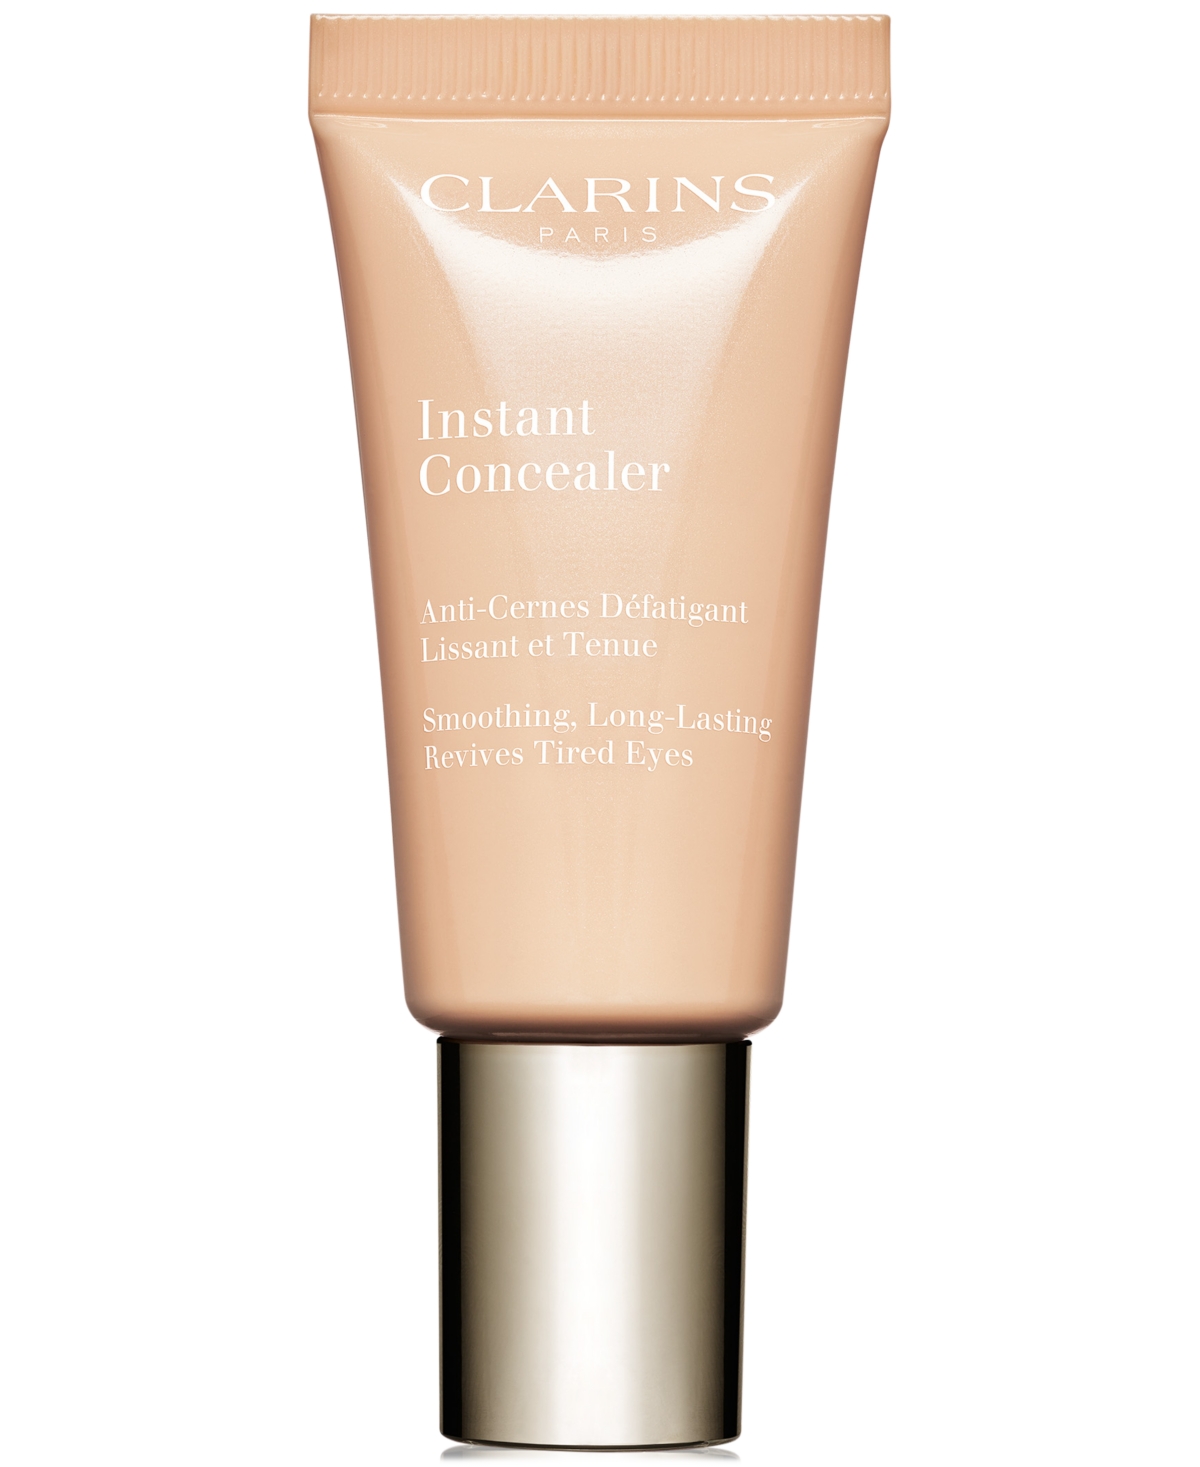 Clarins Instant Concealer In White